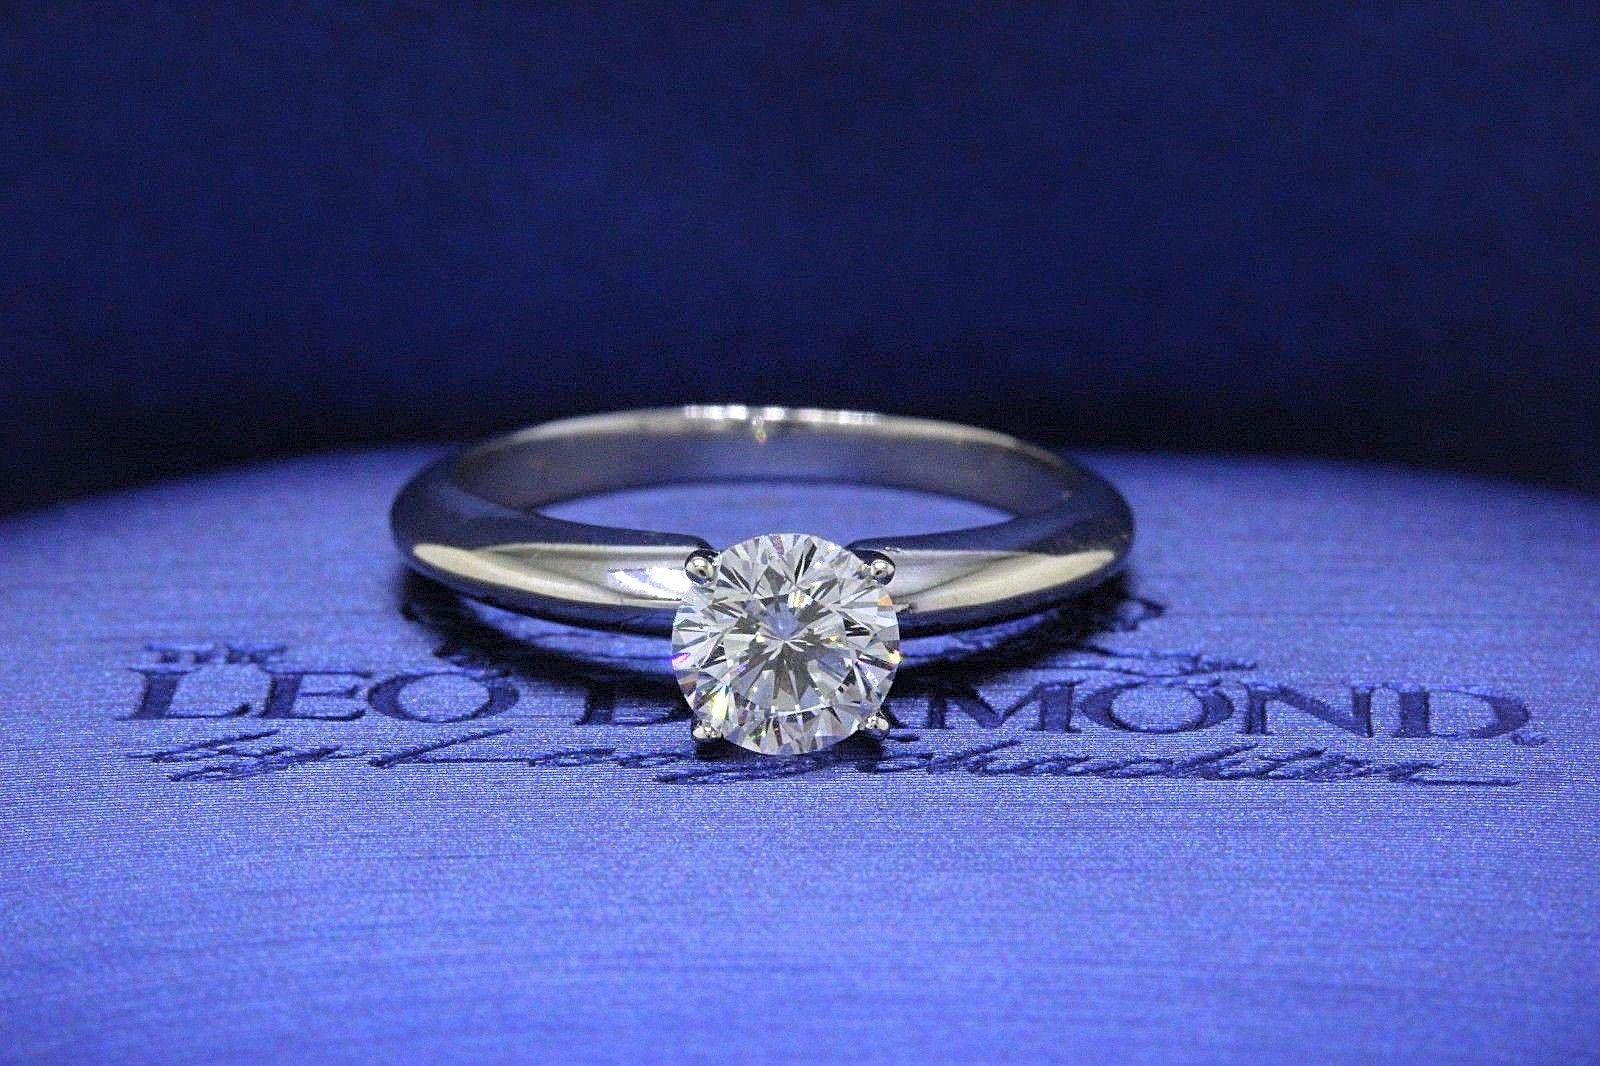 THE LEO DIAMOND SOLITAIRE ENGAGEMENT RING
Style:  4 - Prong Solitaire
Serial Number:  LEO211045
Certificate:  IGI # 33378743
Metal: 14K White Gold
Size:  5 - Sizable 
Total Carat Weight:  0.67 CTS
Diamond Shape:  Leo Round
Diamond Color & Clarity: 